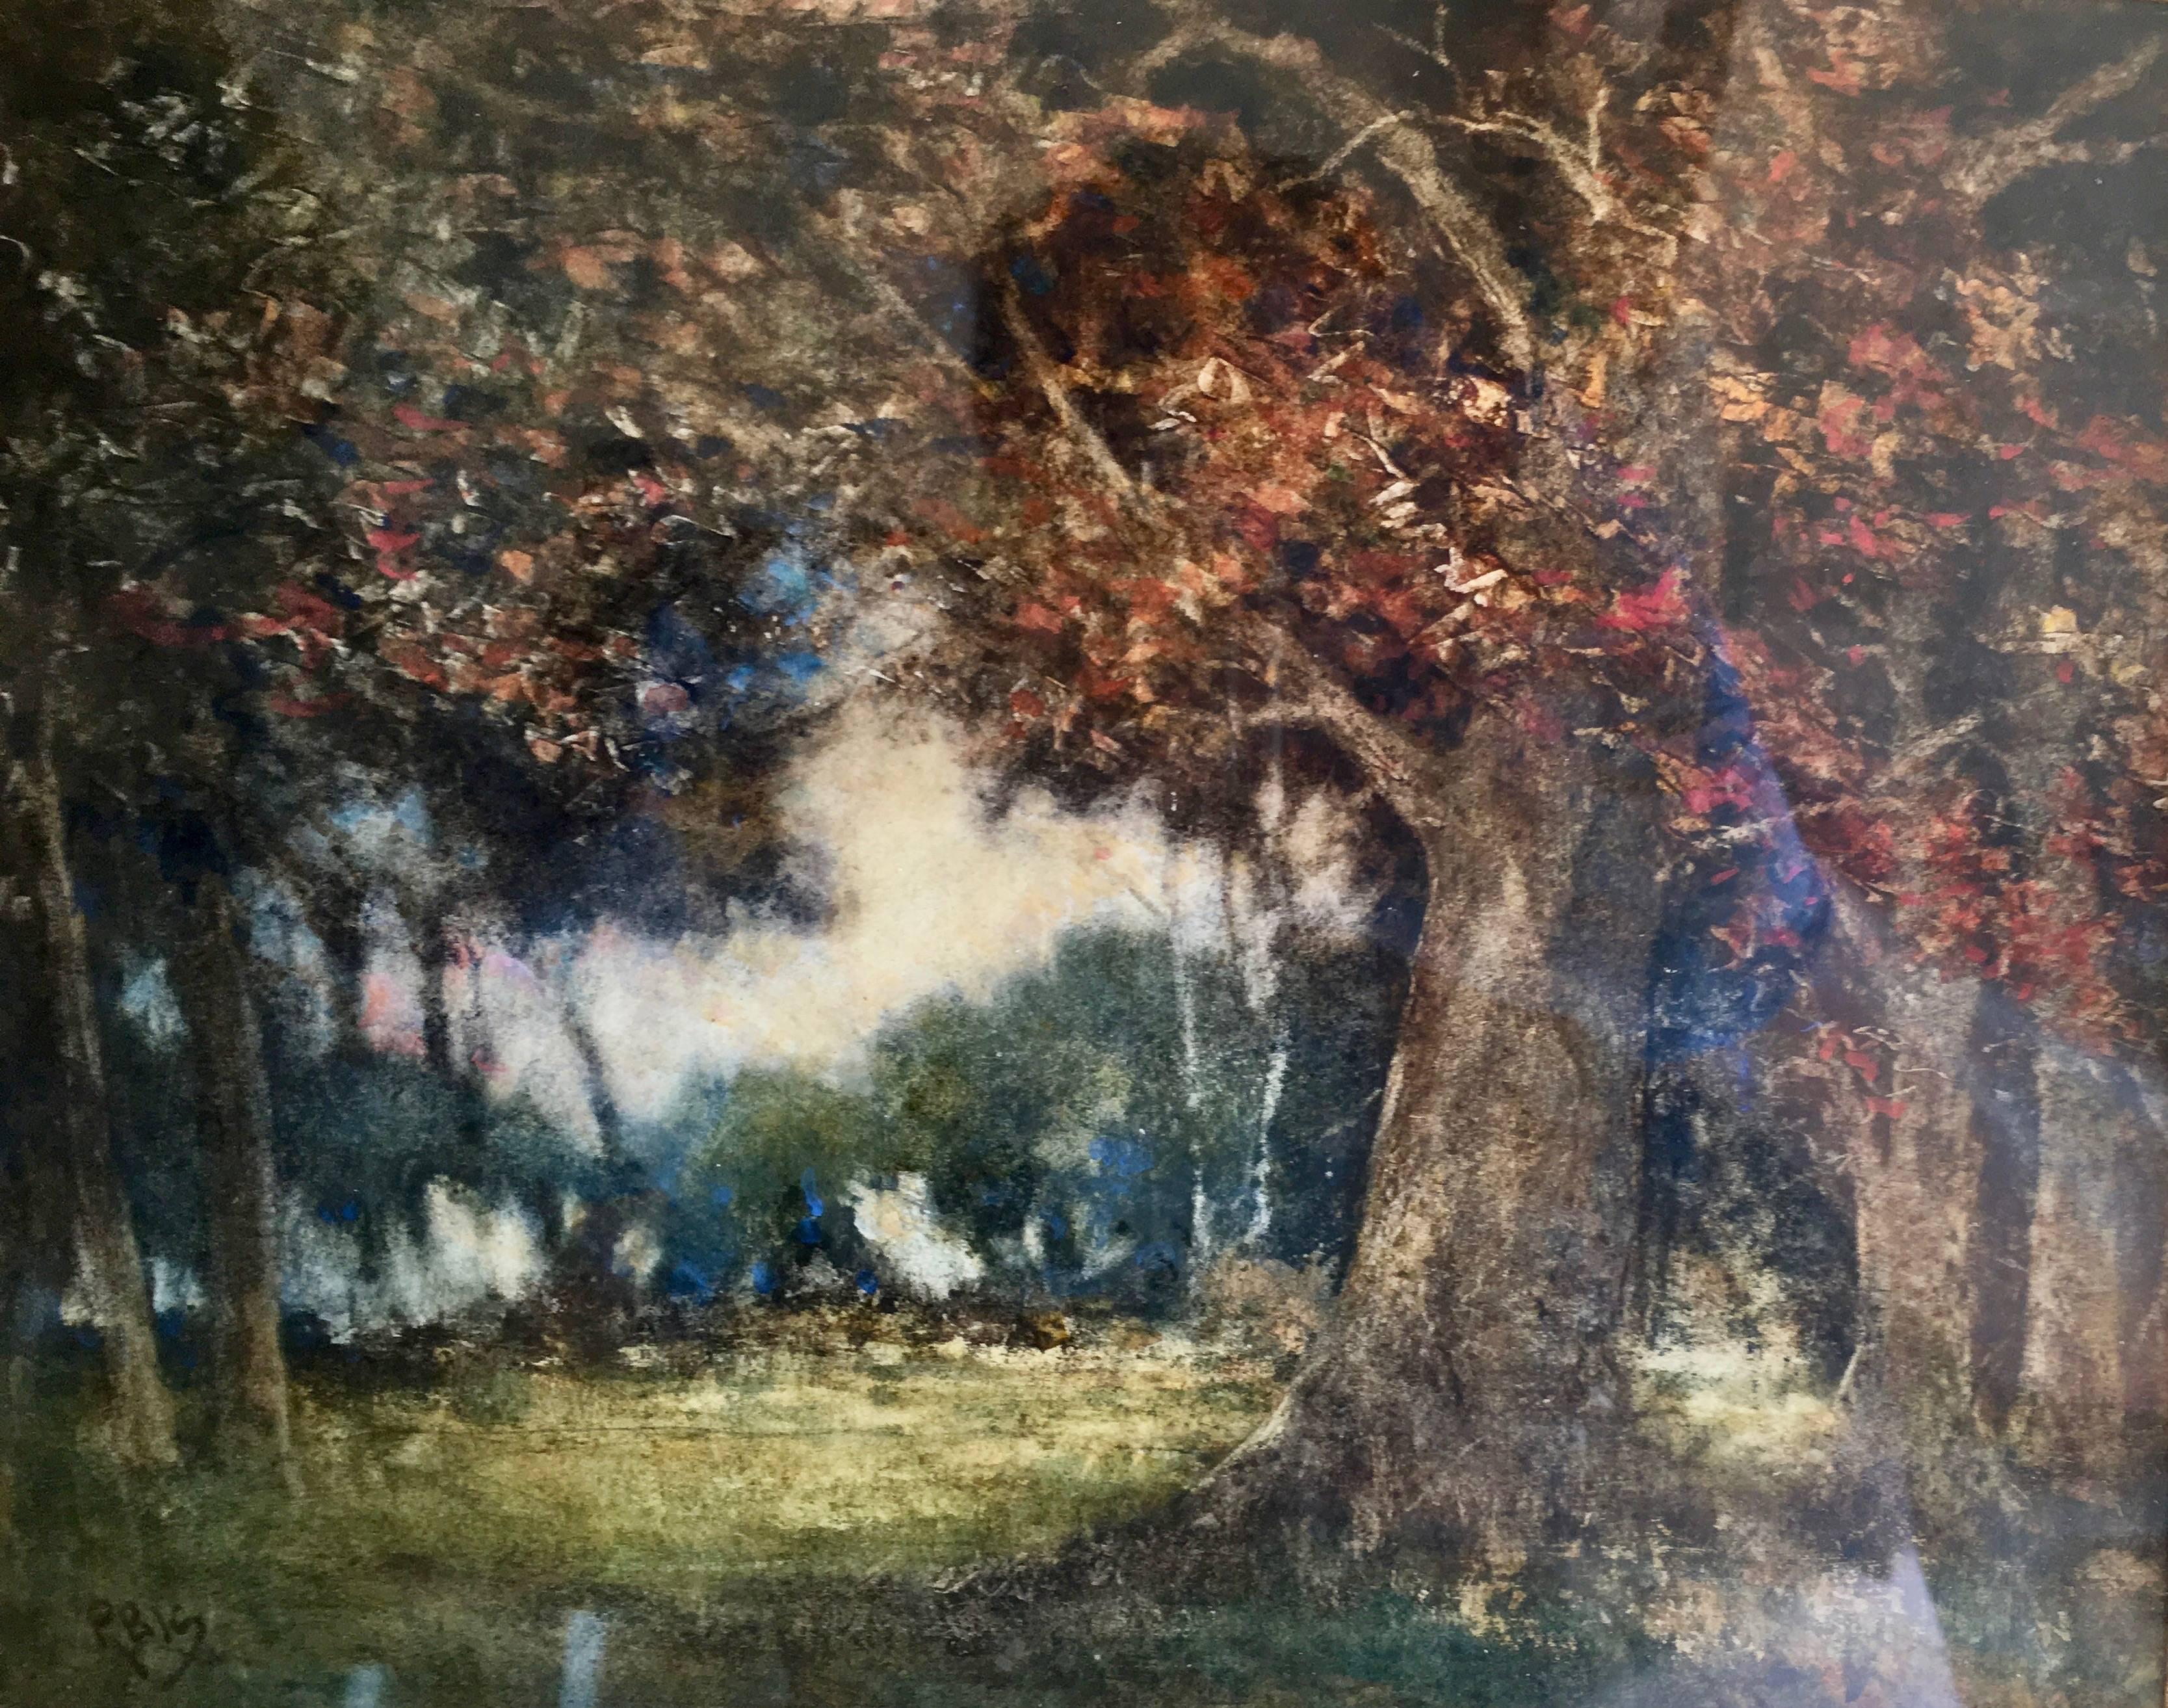 Extensive English wooded landscape - Painting by Beatrice Lawrence Smith